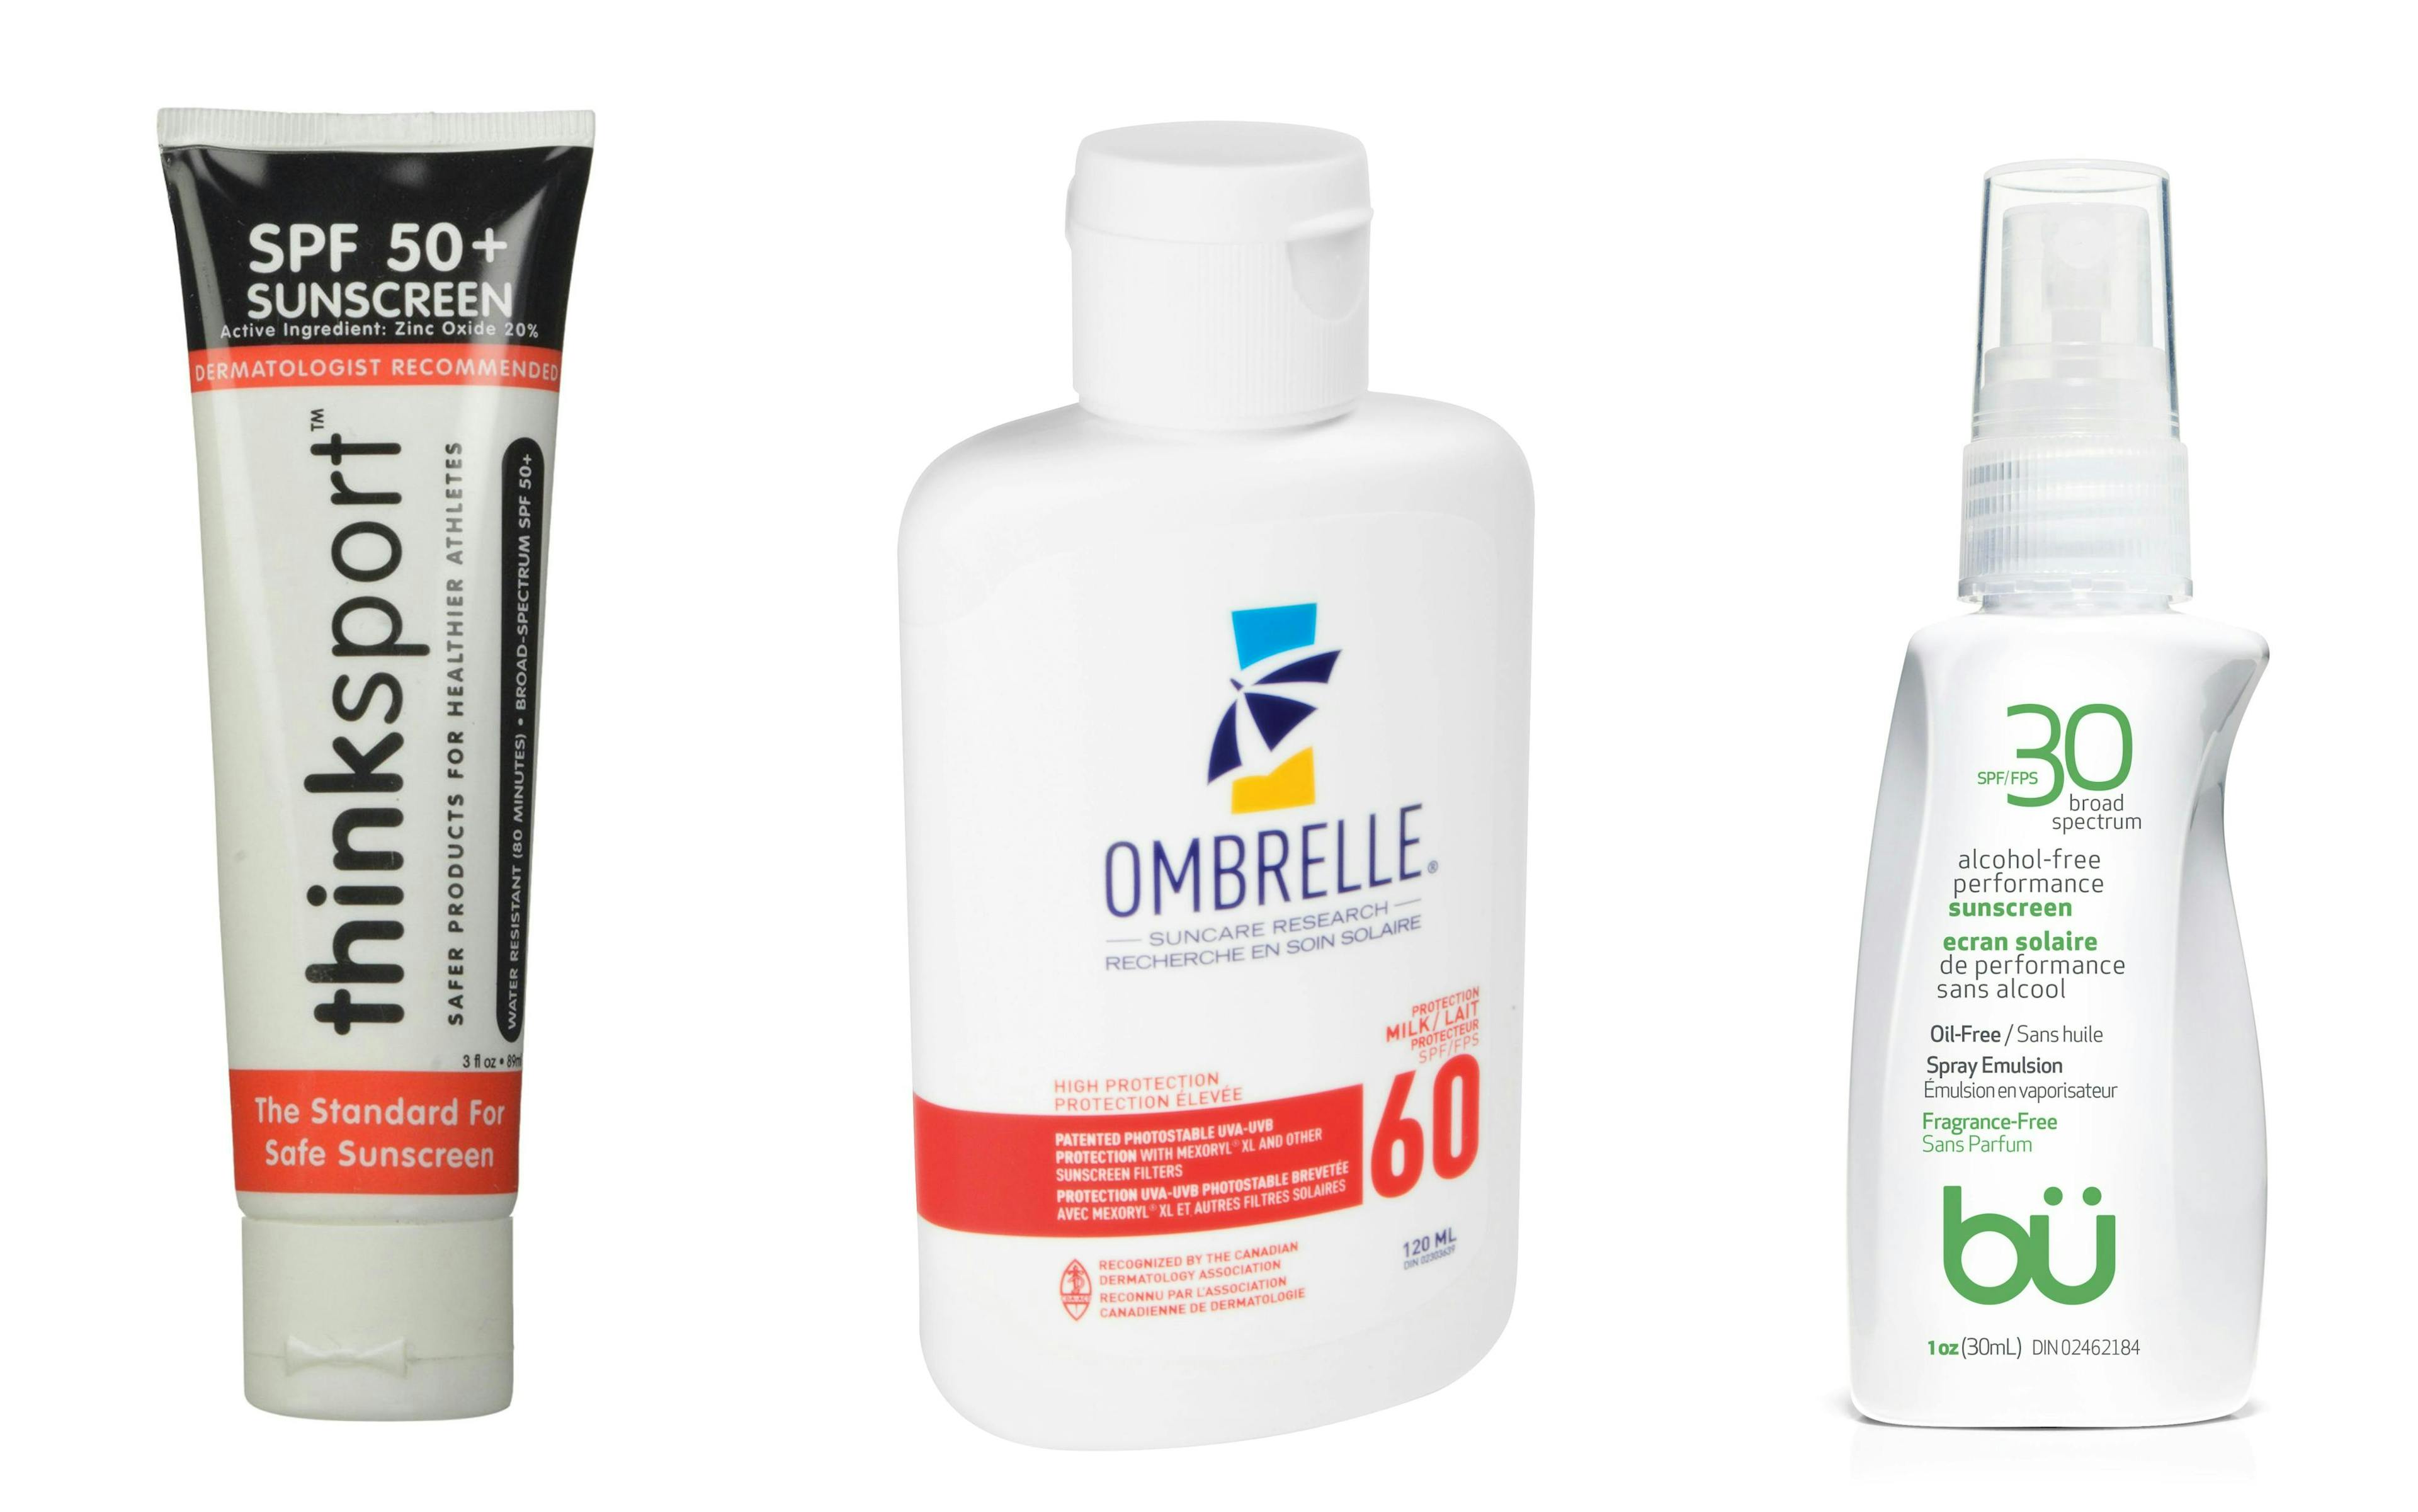 3 different kinds of sunscreen